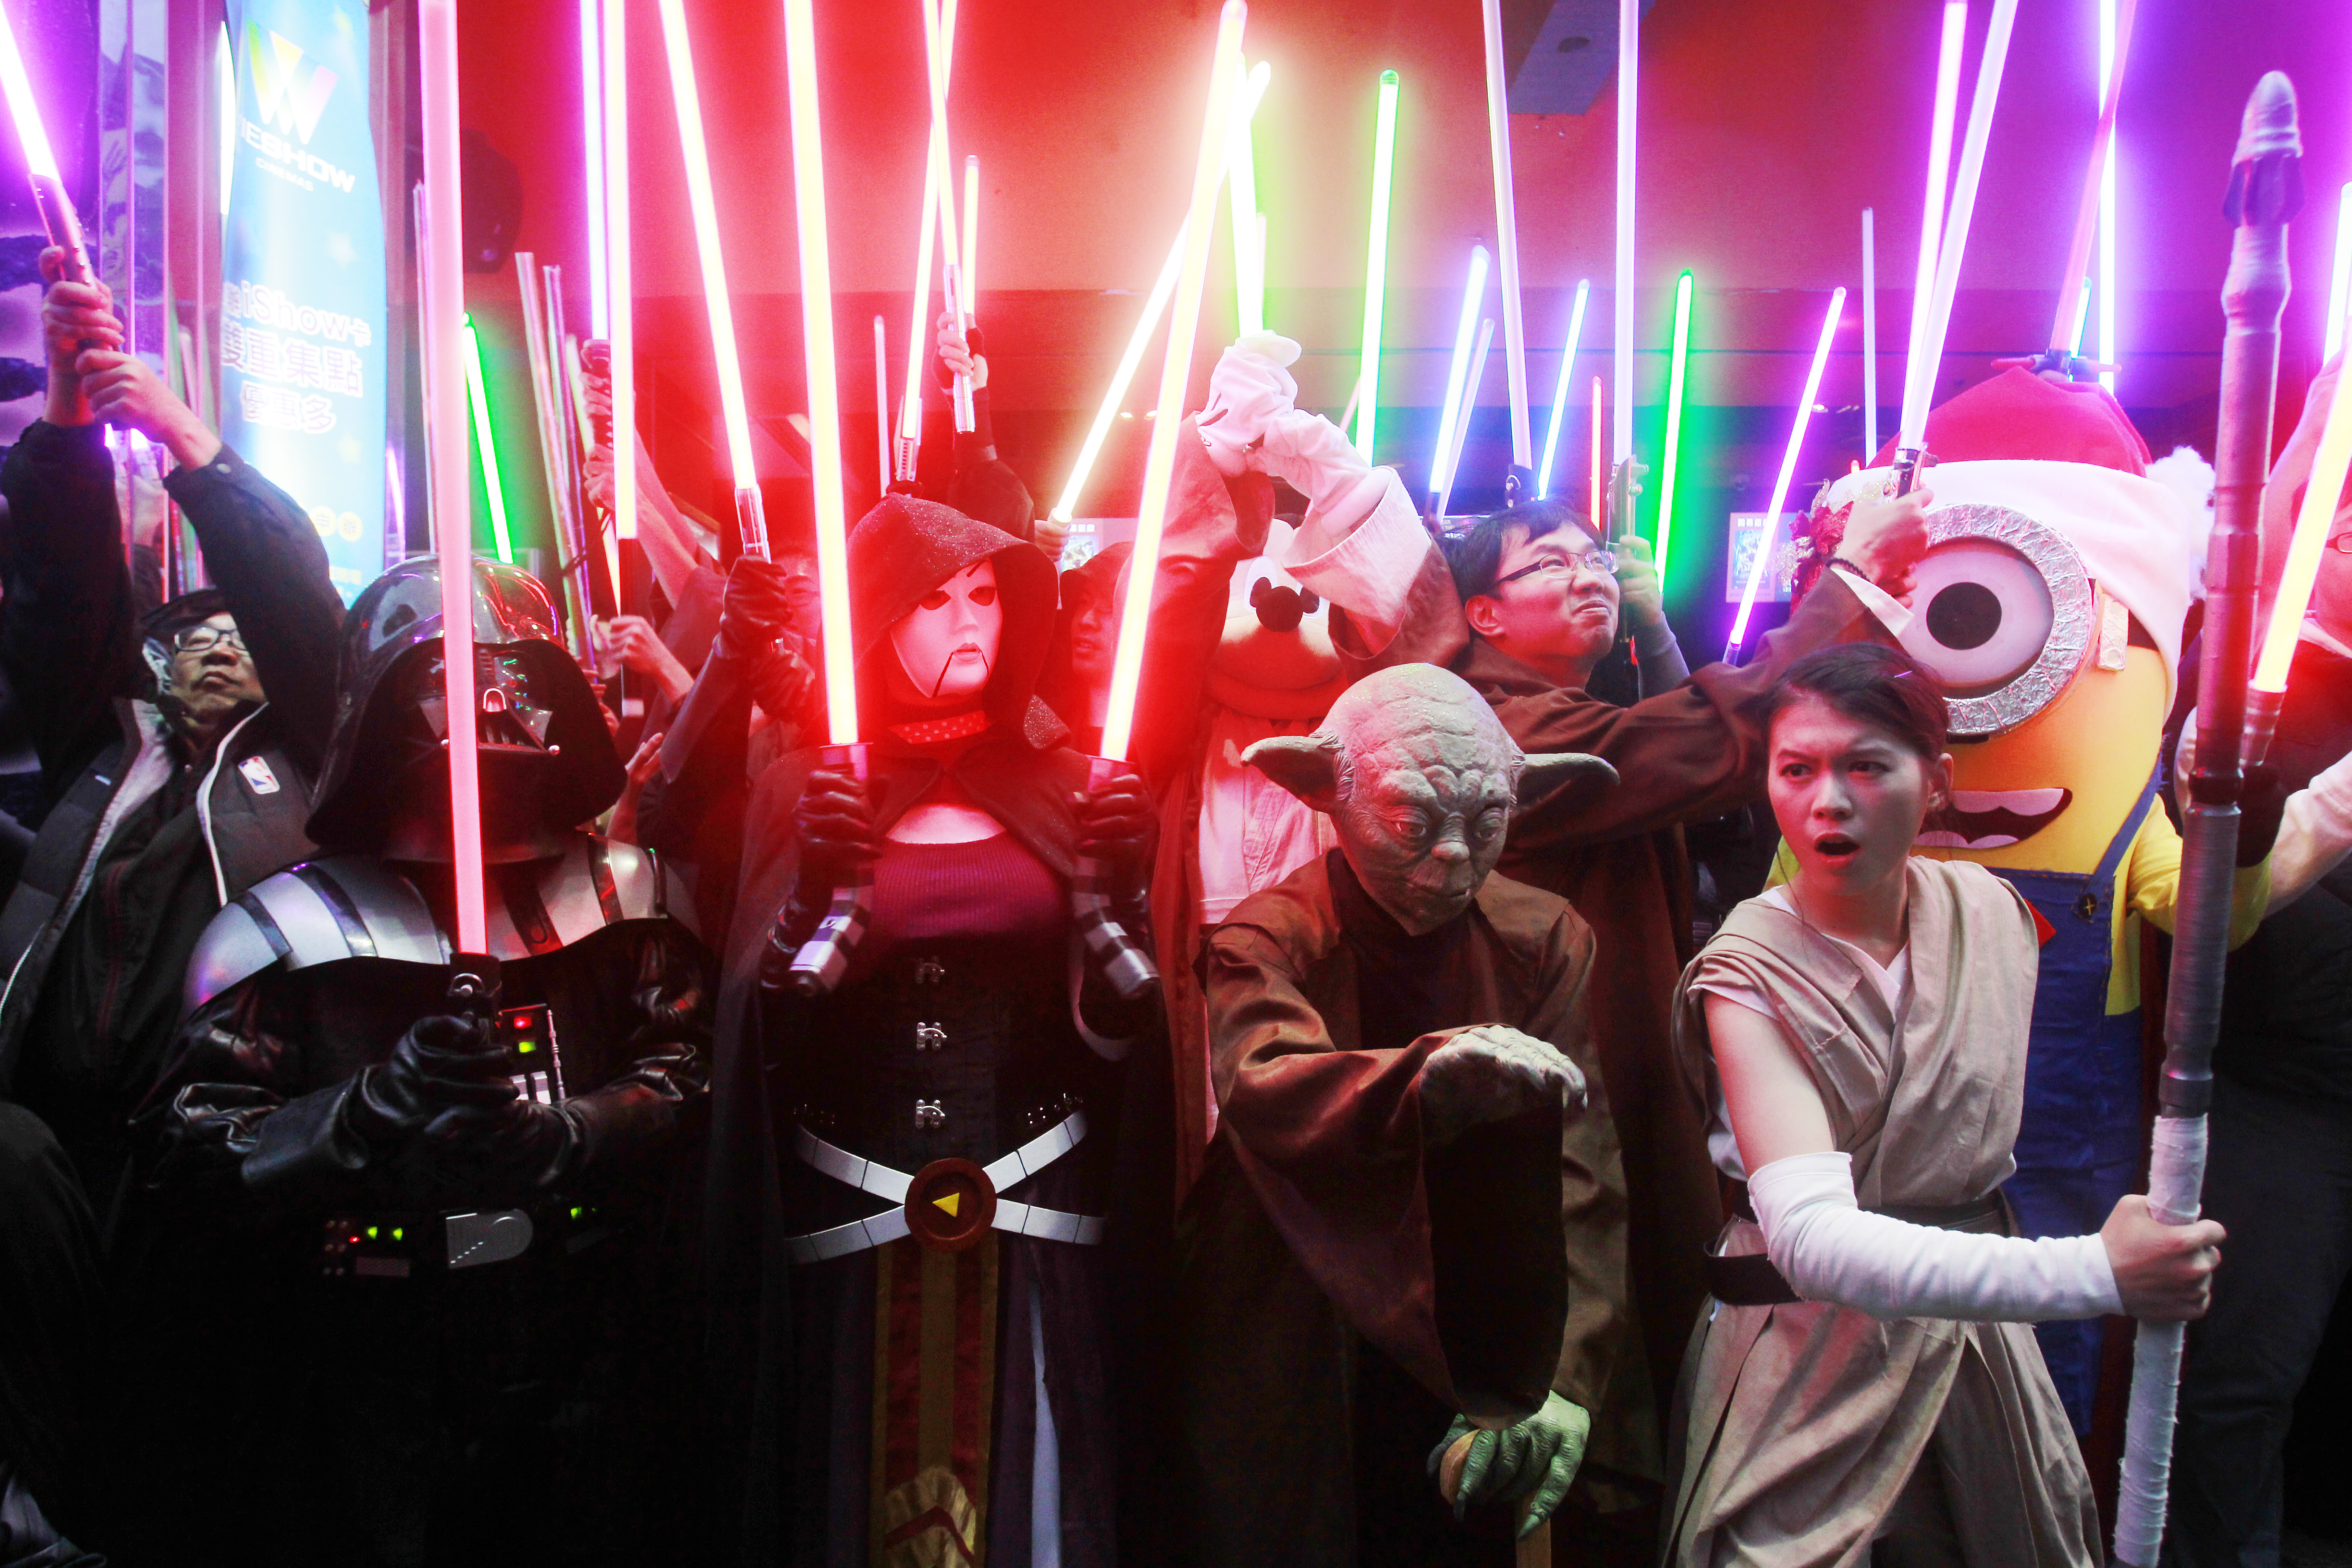 'Star Wars: The Force Awakens' passes $250 million globally after a record Friday ...4896 x 3264